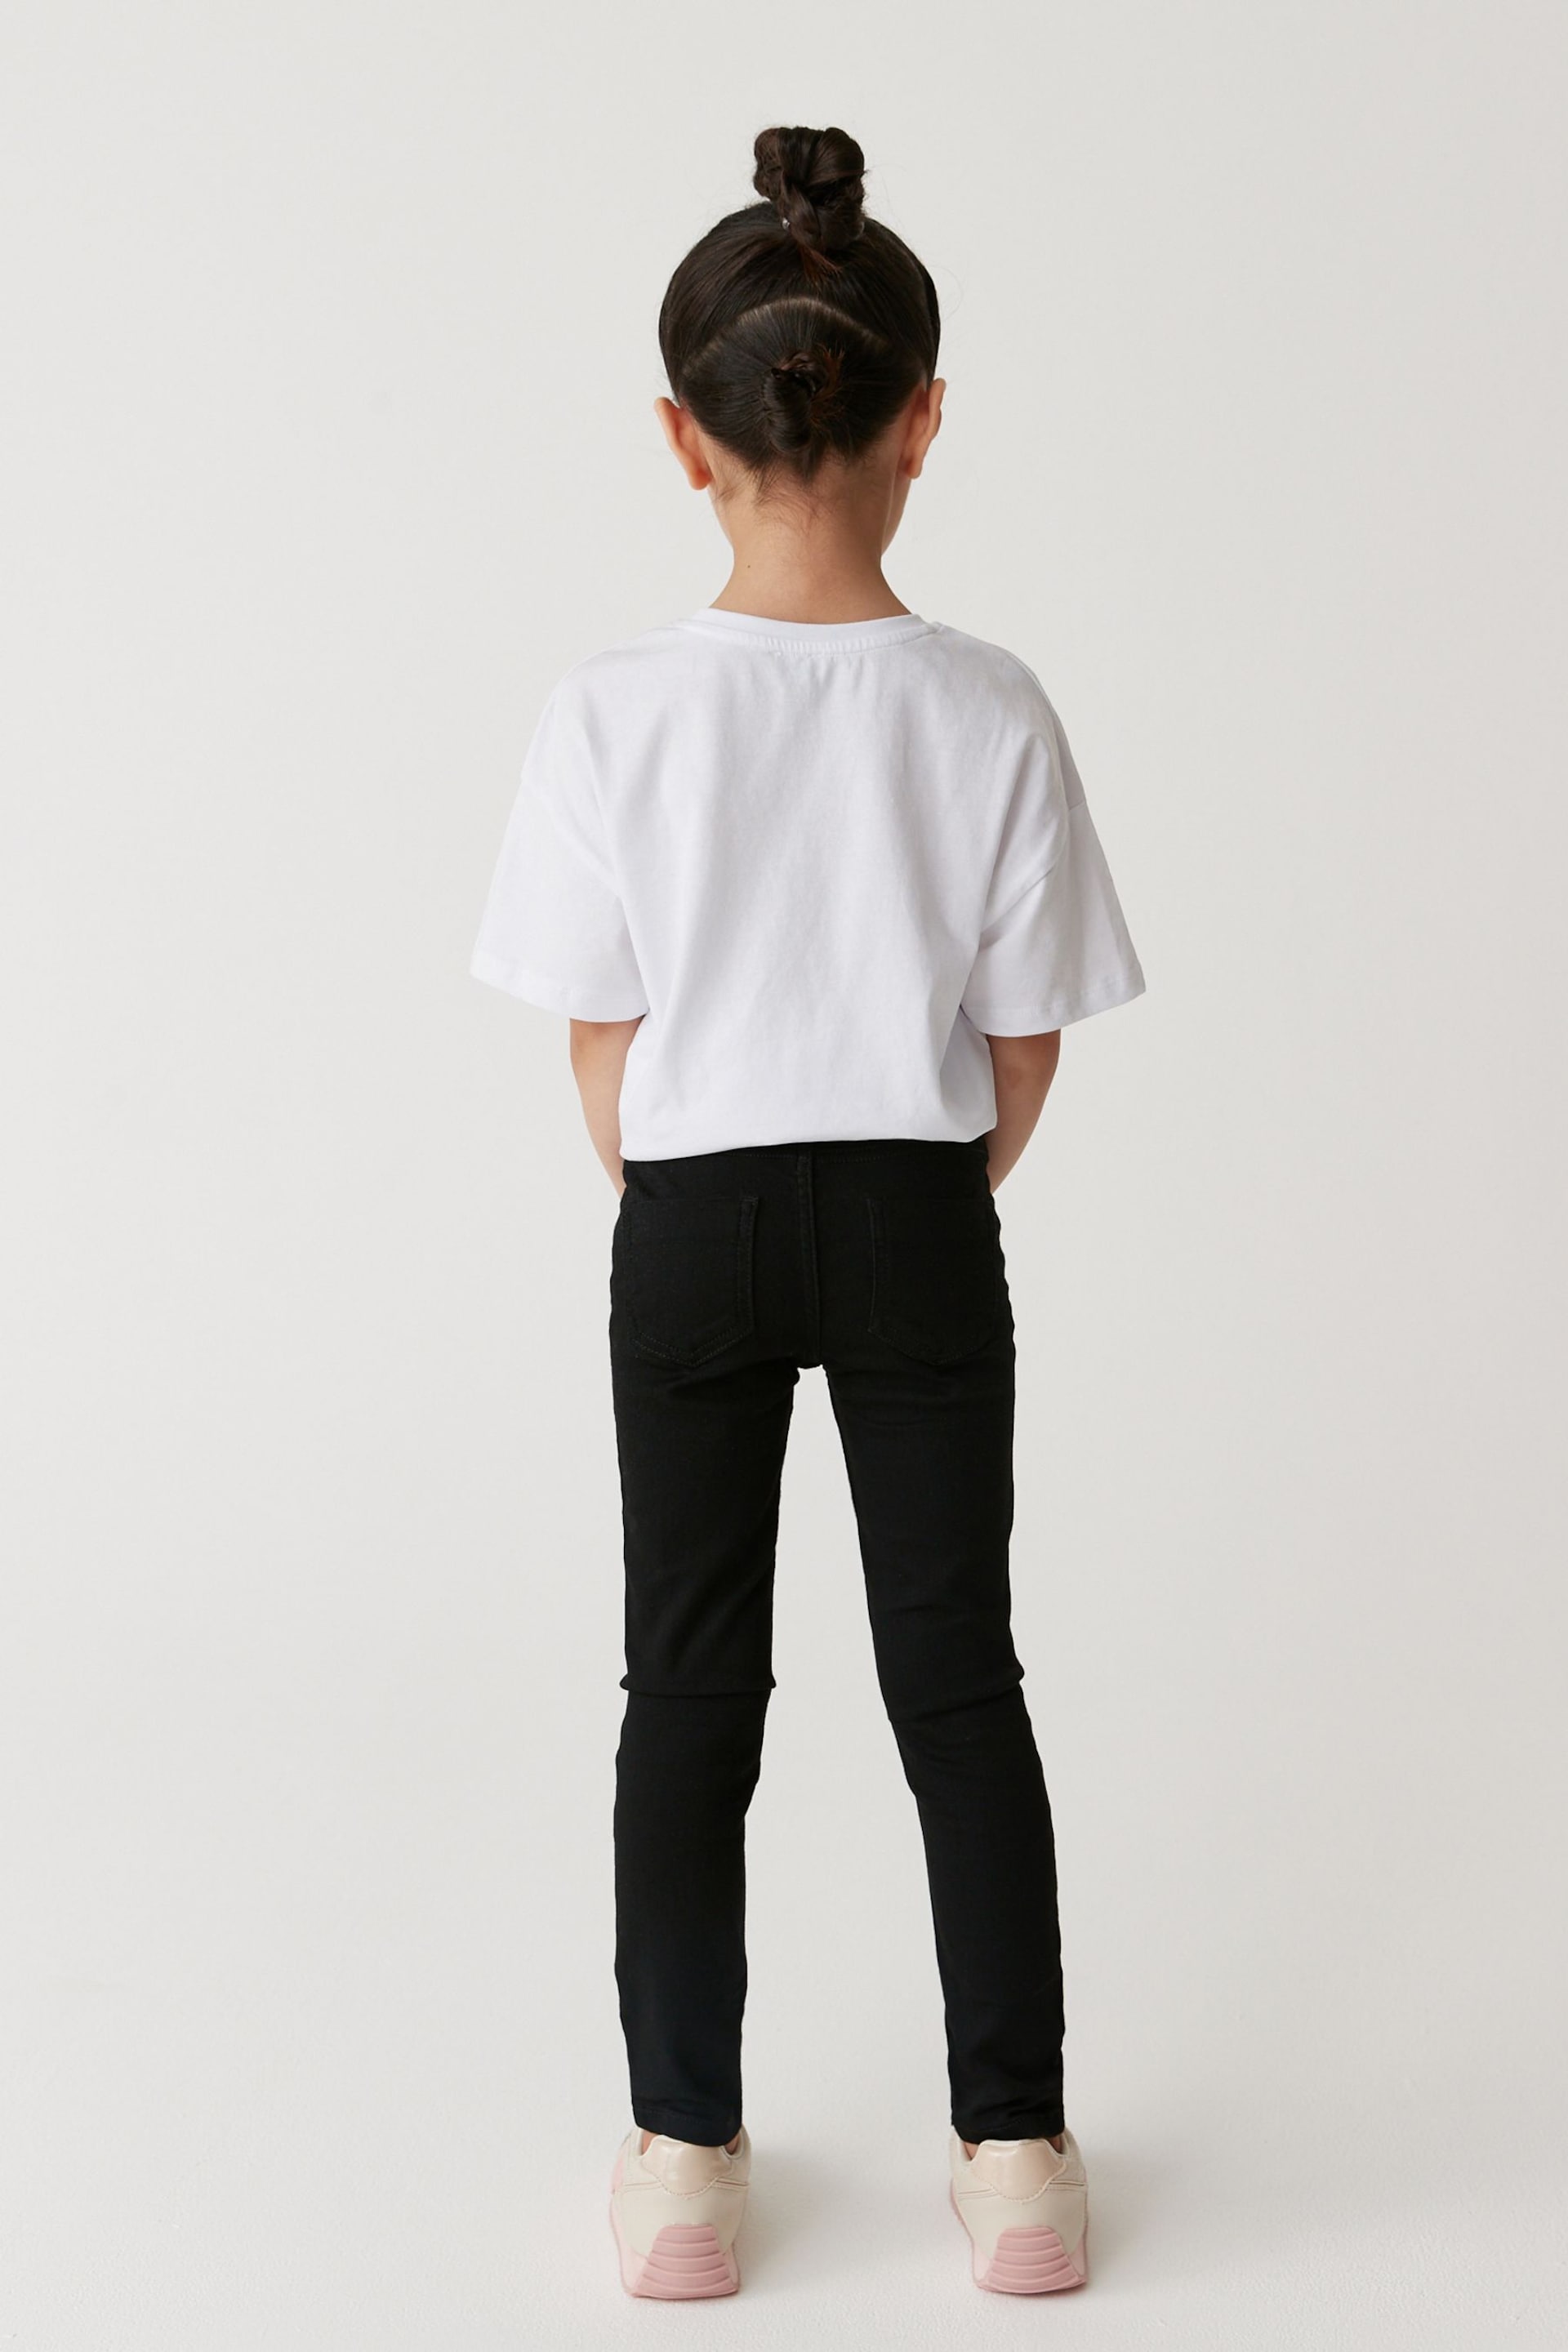 River Island Black Girls Molly Mid Rise Skinny Jeans - Image 3 of 4